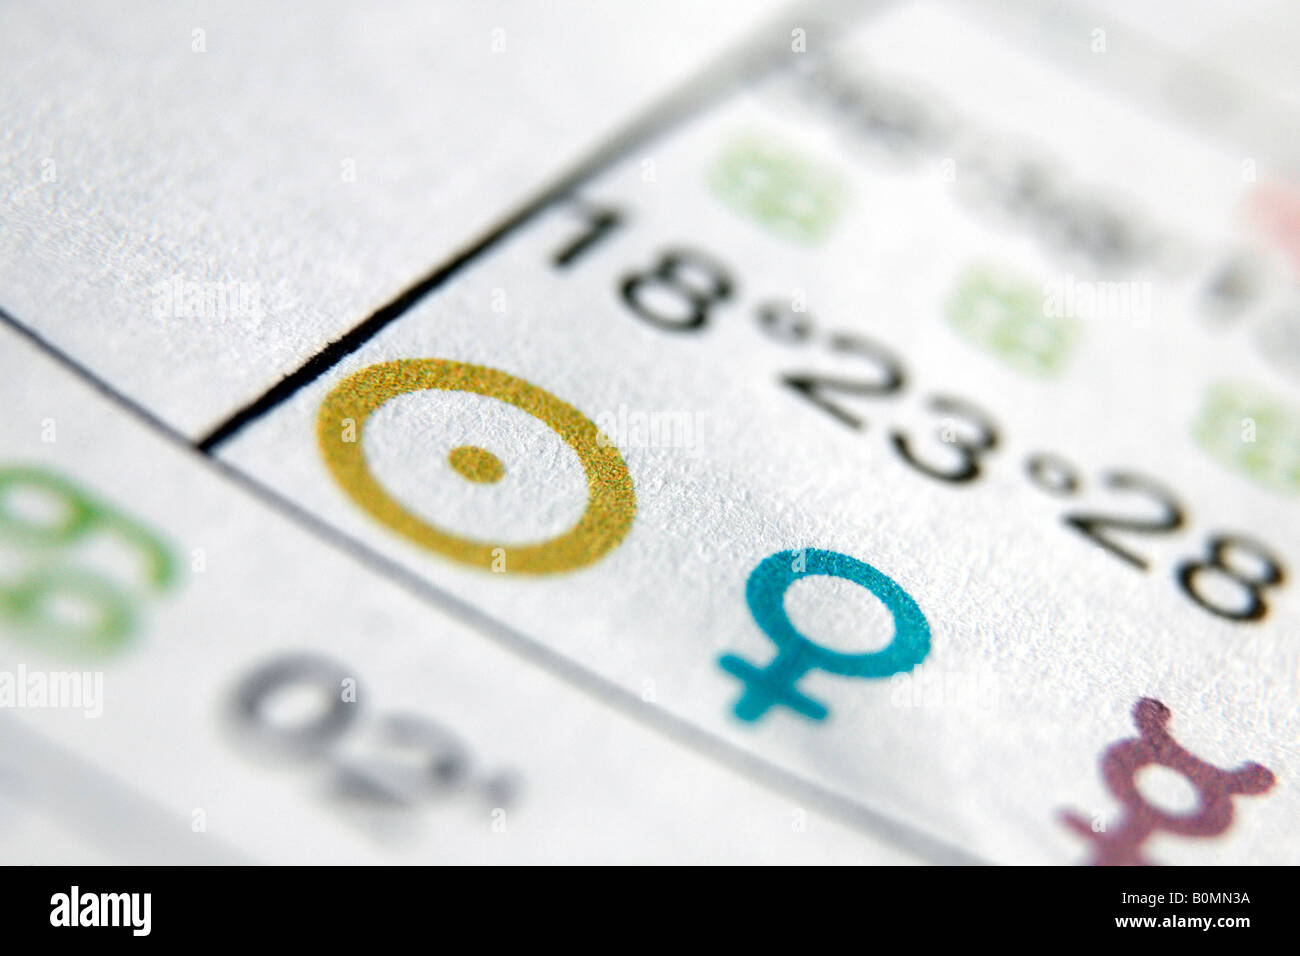 Close up of symbols on an astrological chart Stock Photo